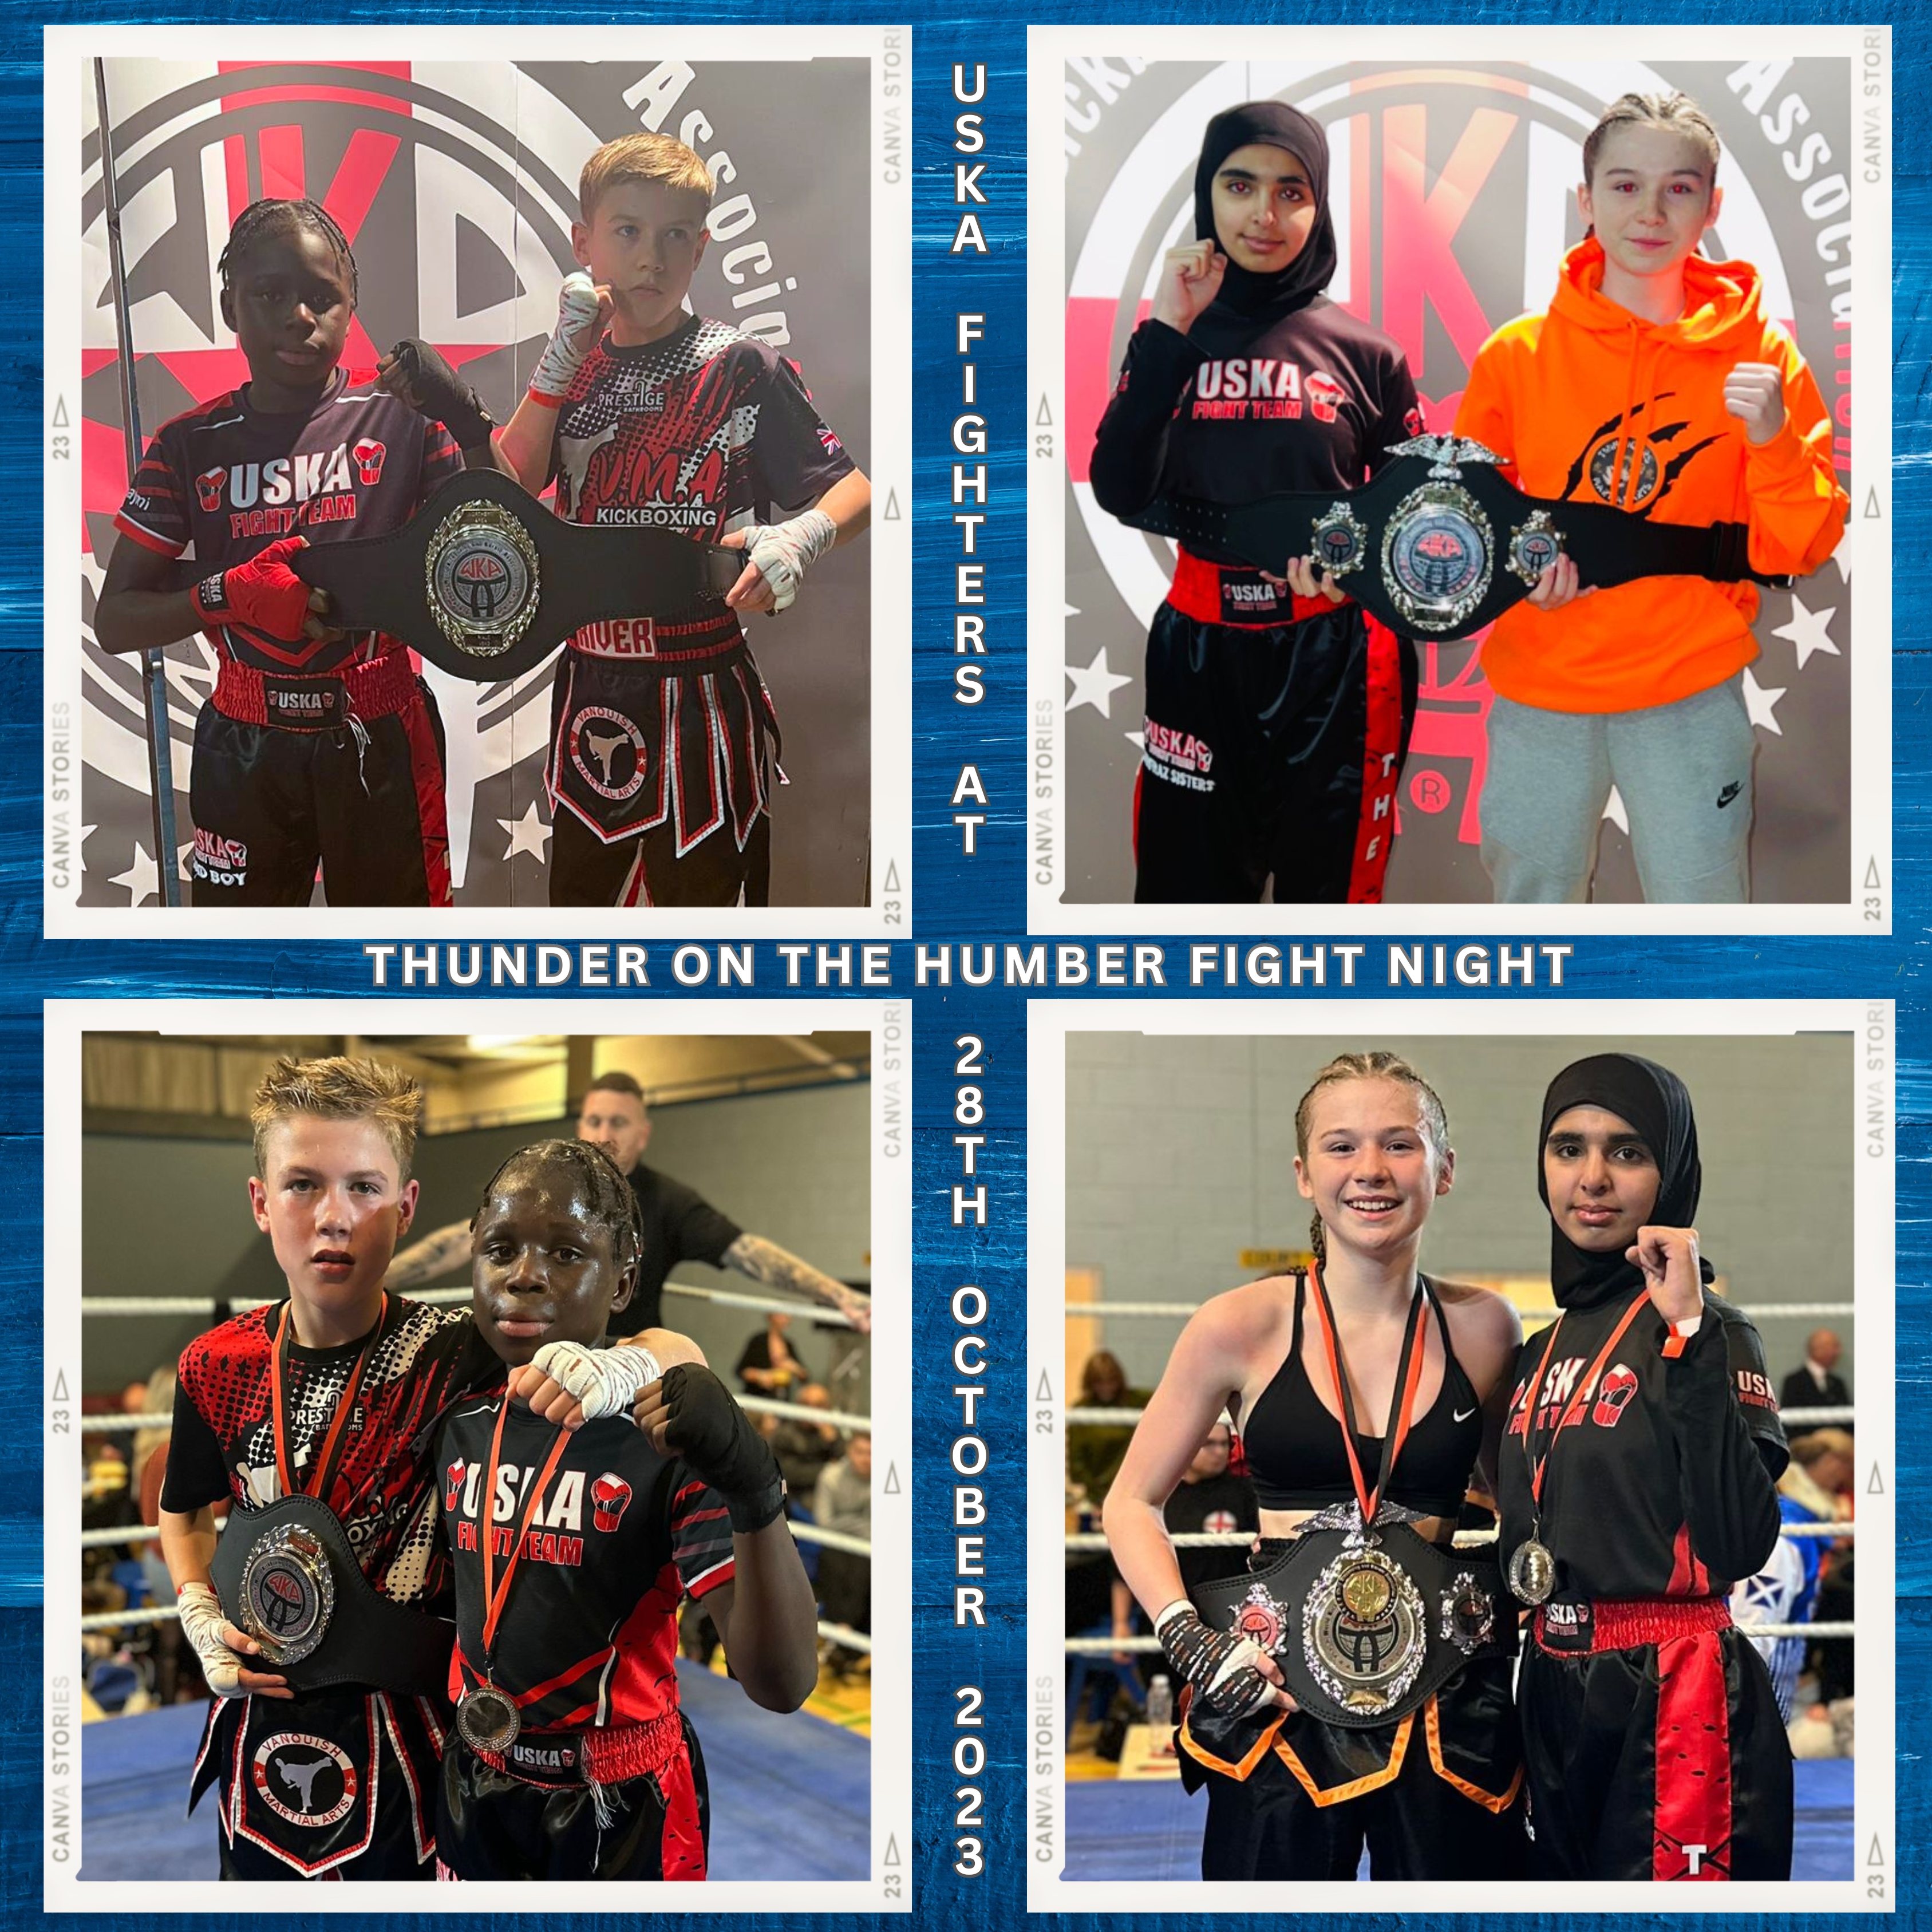 28-10-23 - Win or Learn, we are super proud of our Thunder On The Humber Fight Night Fighters